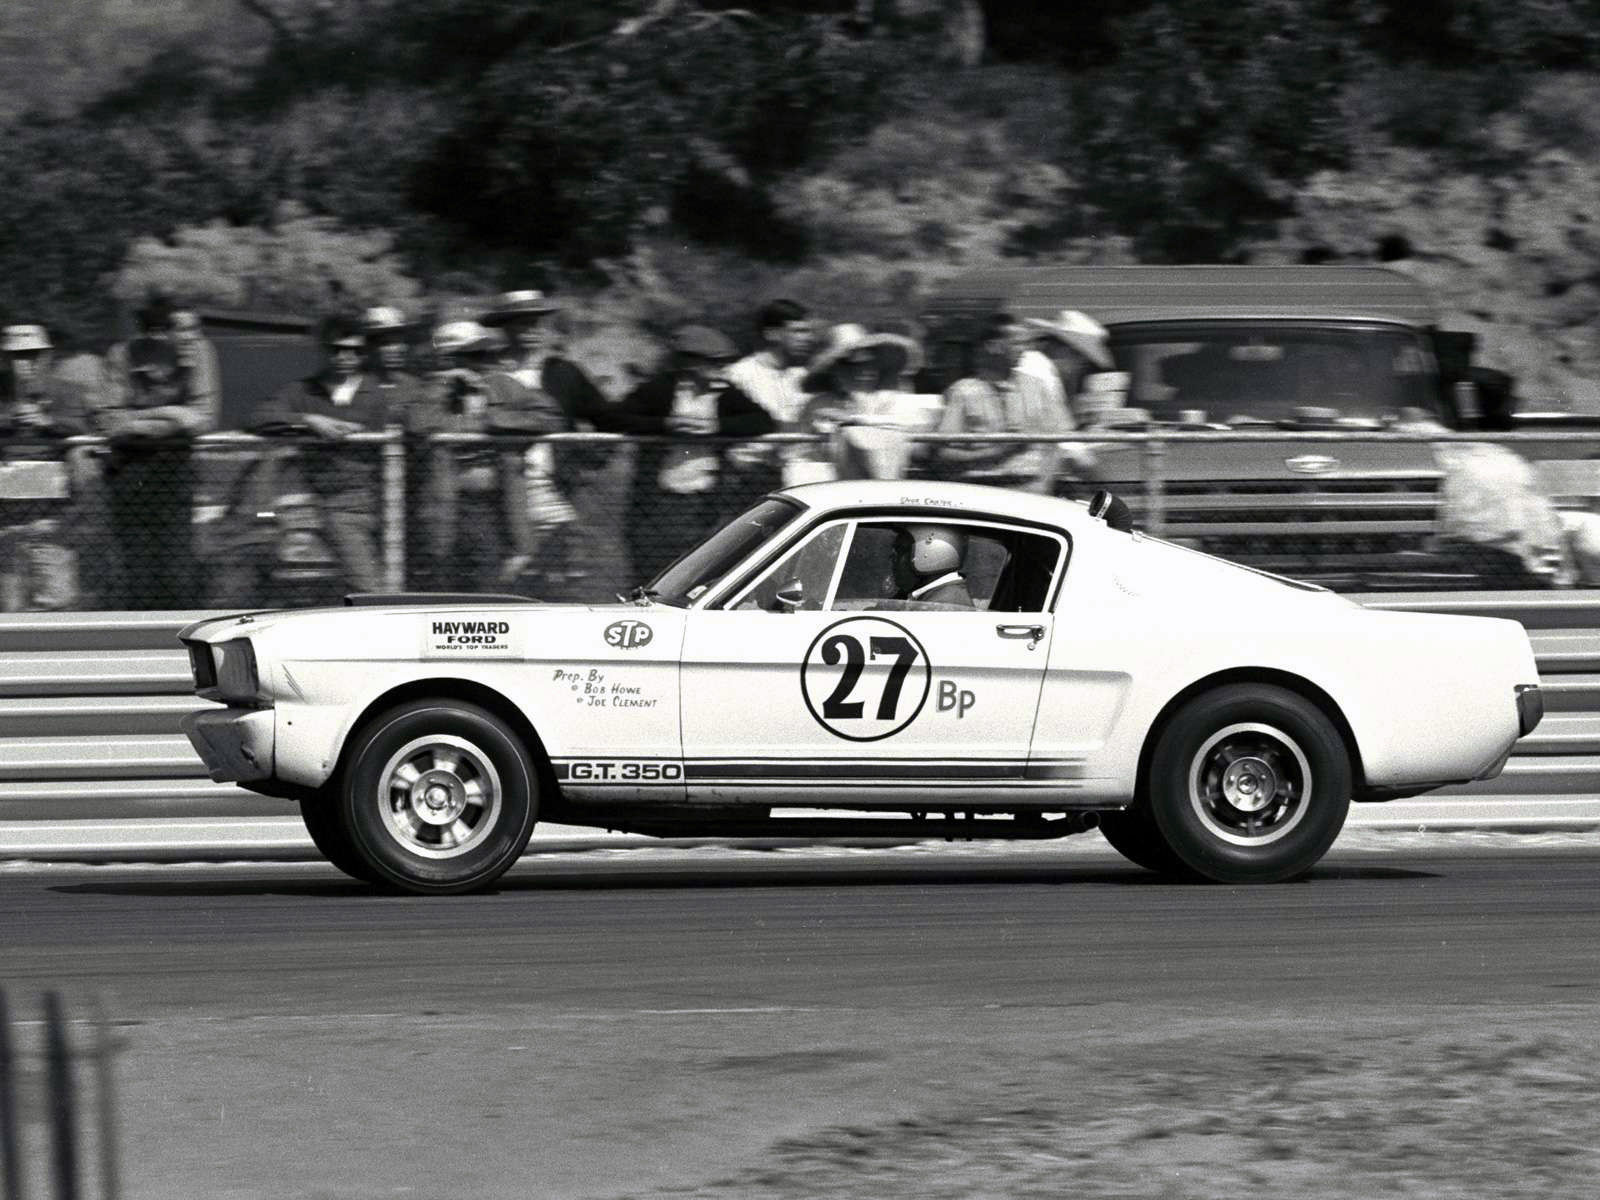 1965, Shelby, Gt350r, Ford, Mustang, Classic, Muscle, Race, Racing, B w Wallpaper